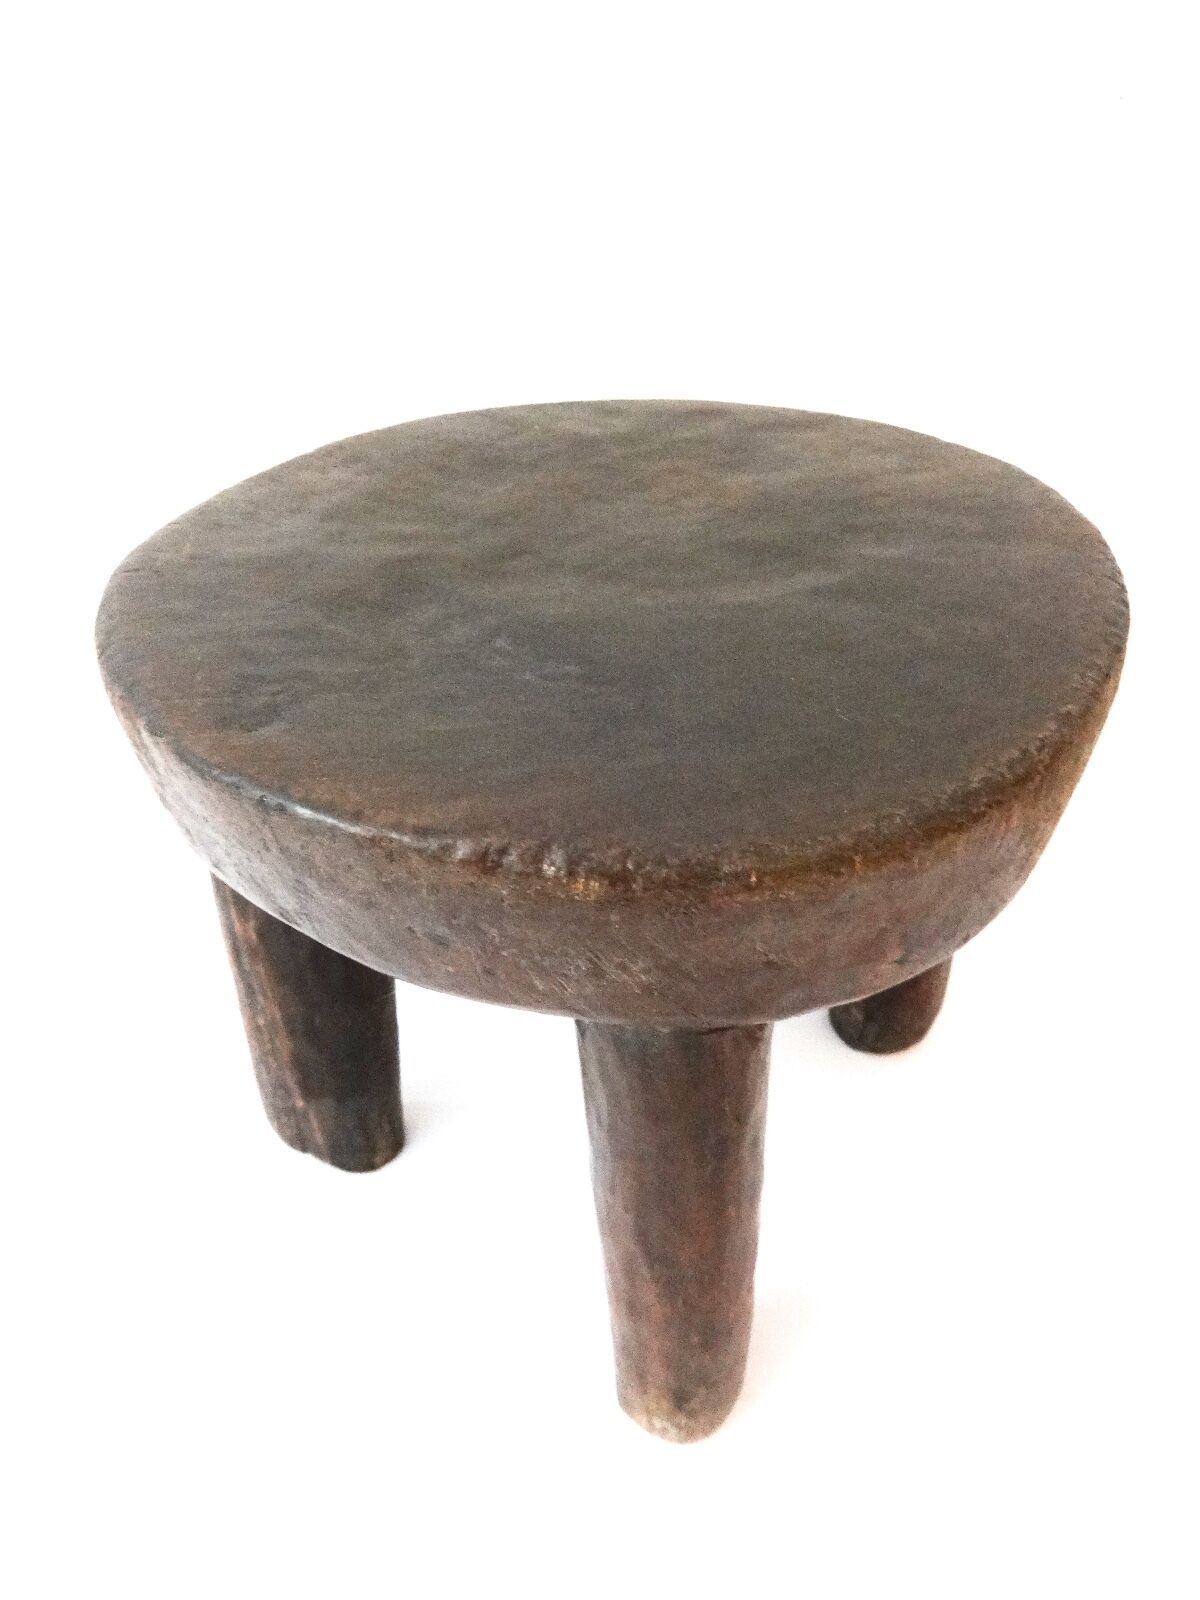 #1658 African Old Carved Wood Milk Stool Hehe Gogo People Tanzania 7.5" H by 10" D